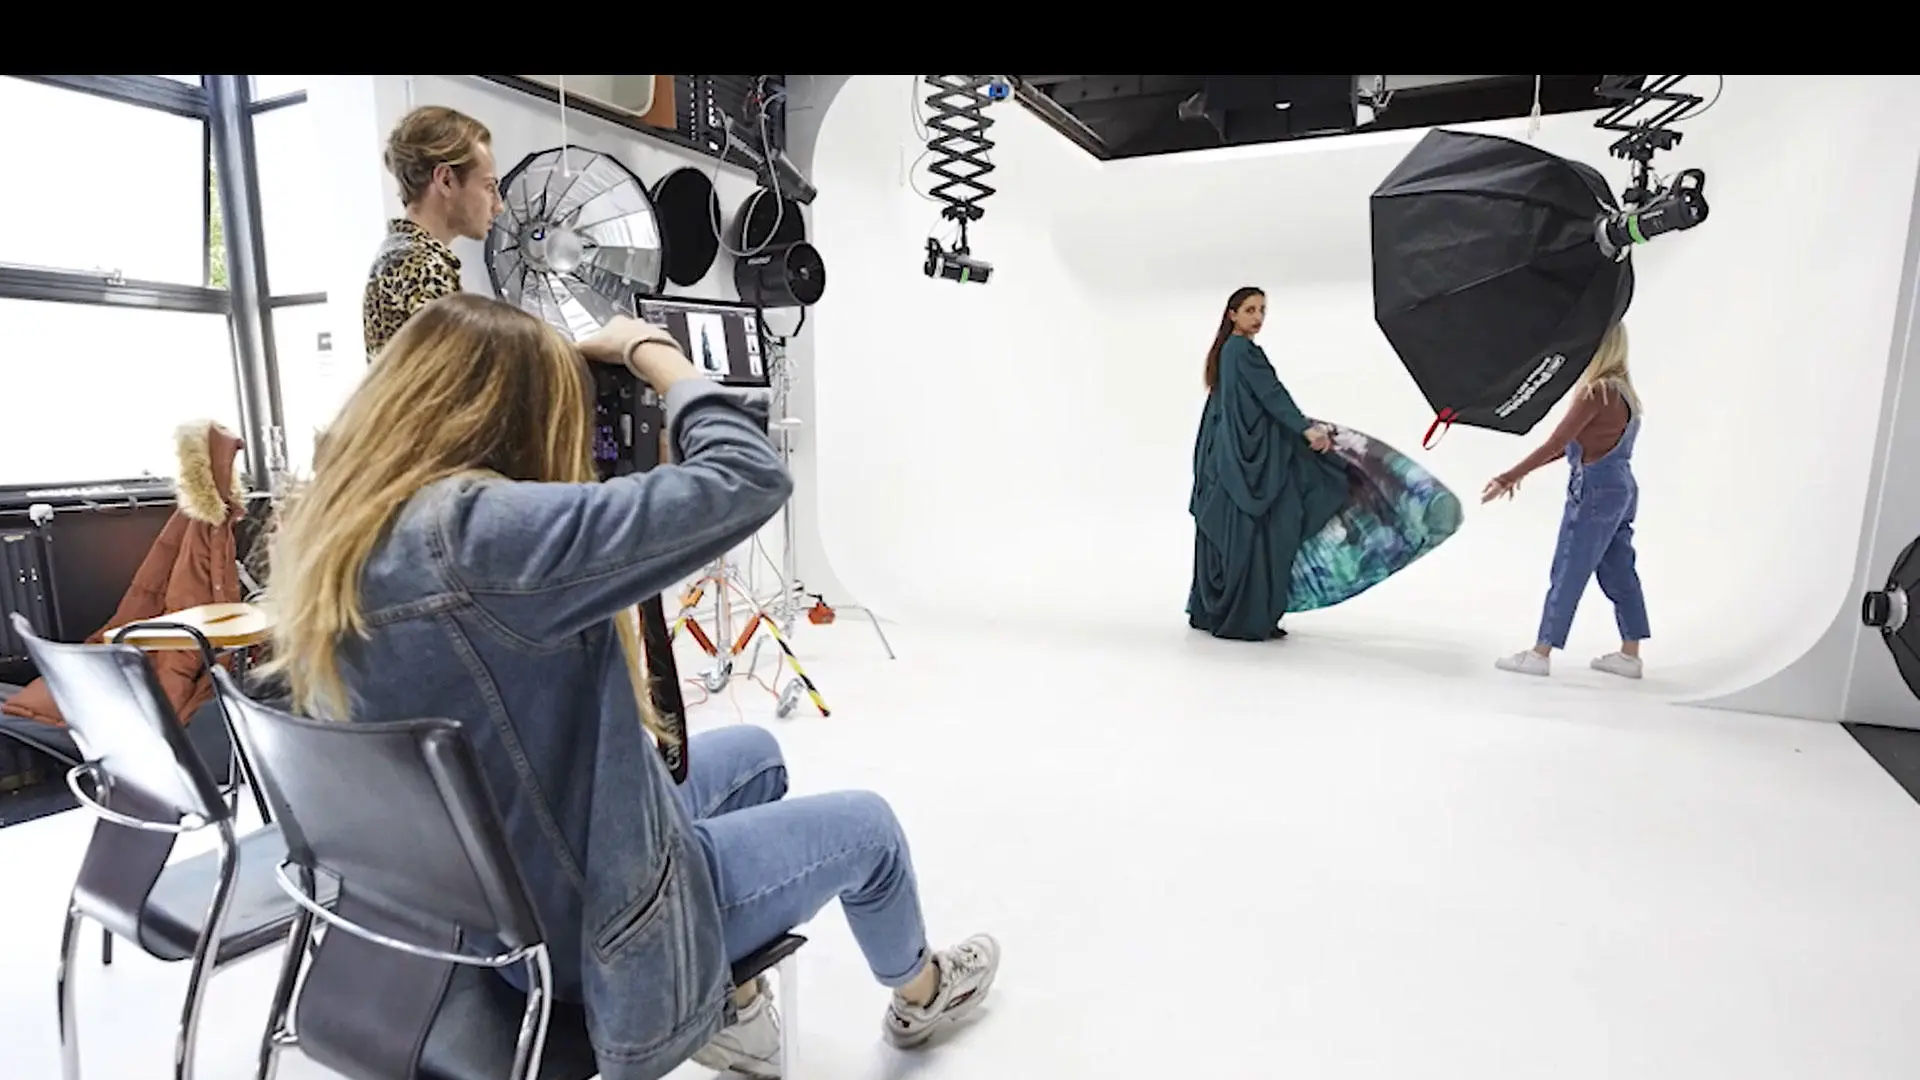 Fashion and photography students during a photoshoot